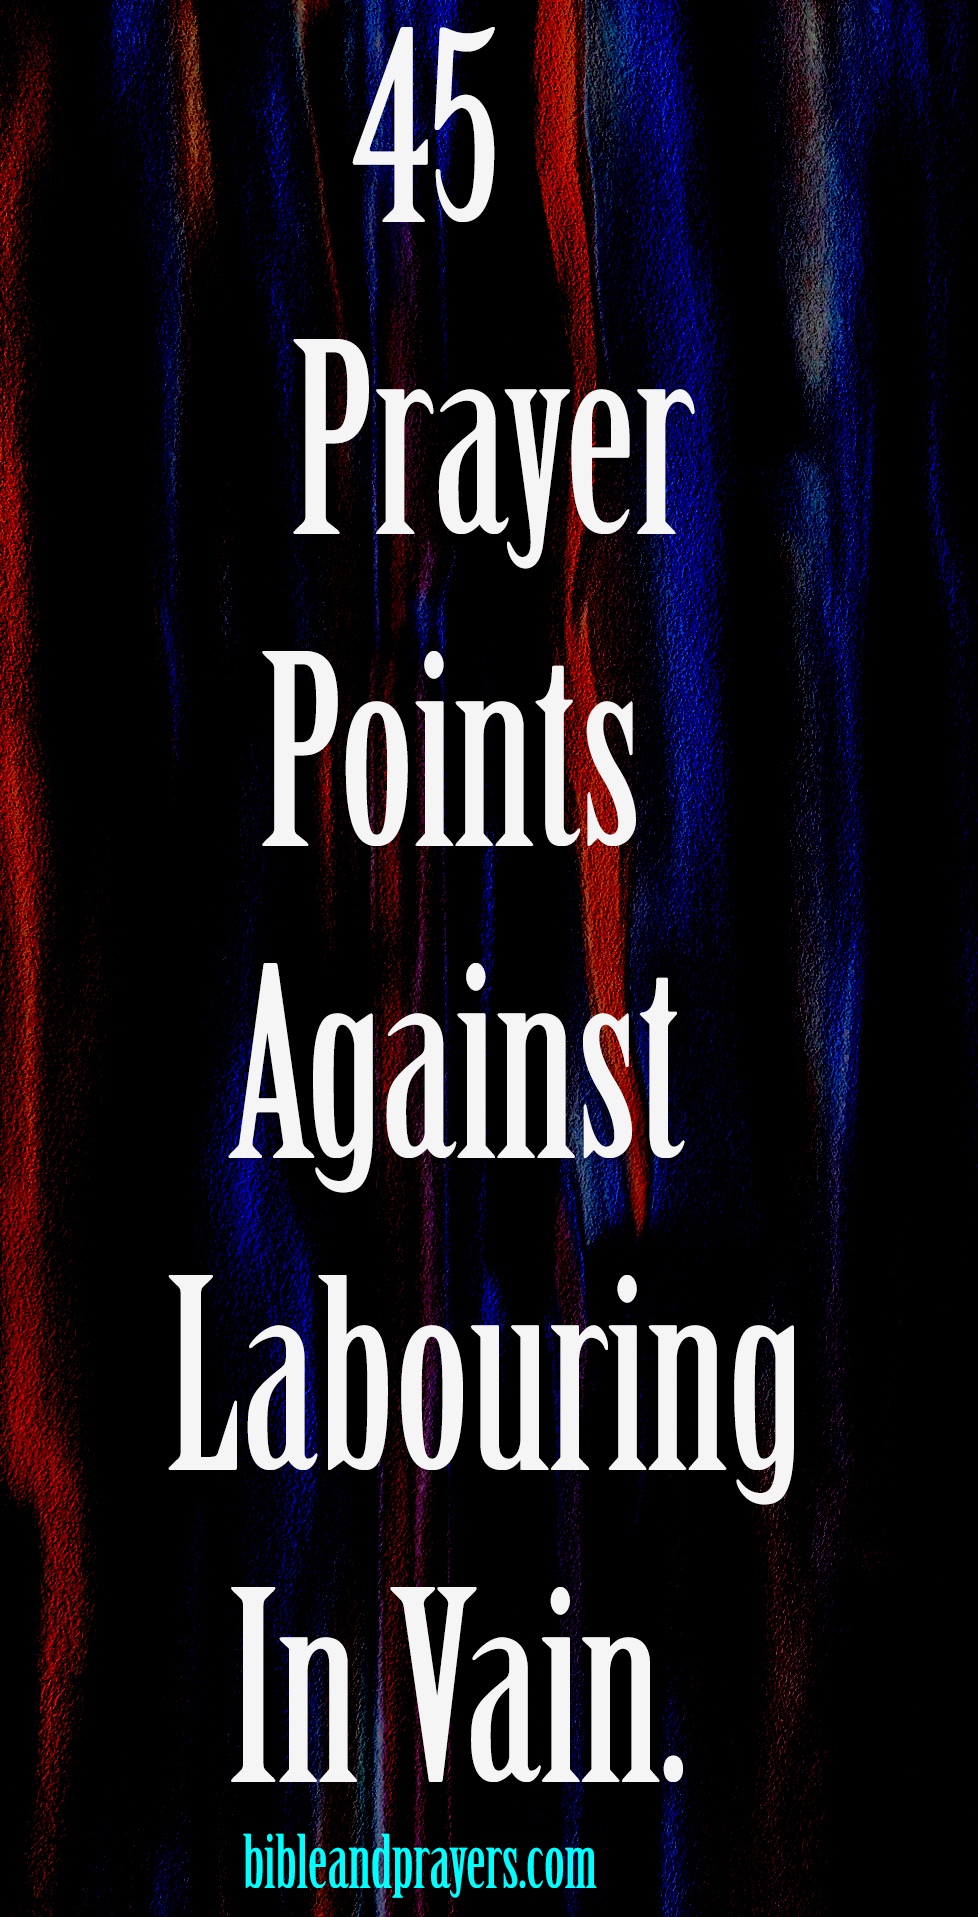 45 Prayer Points Against Labouring In Vain.